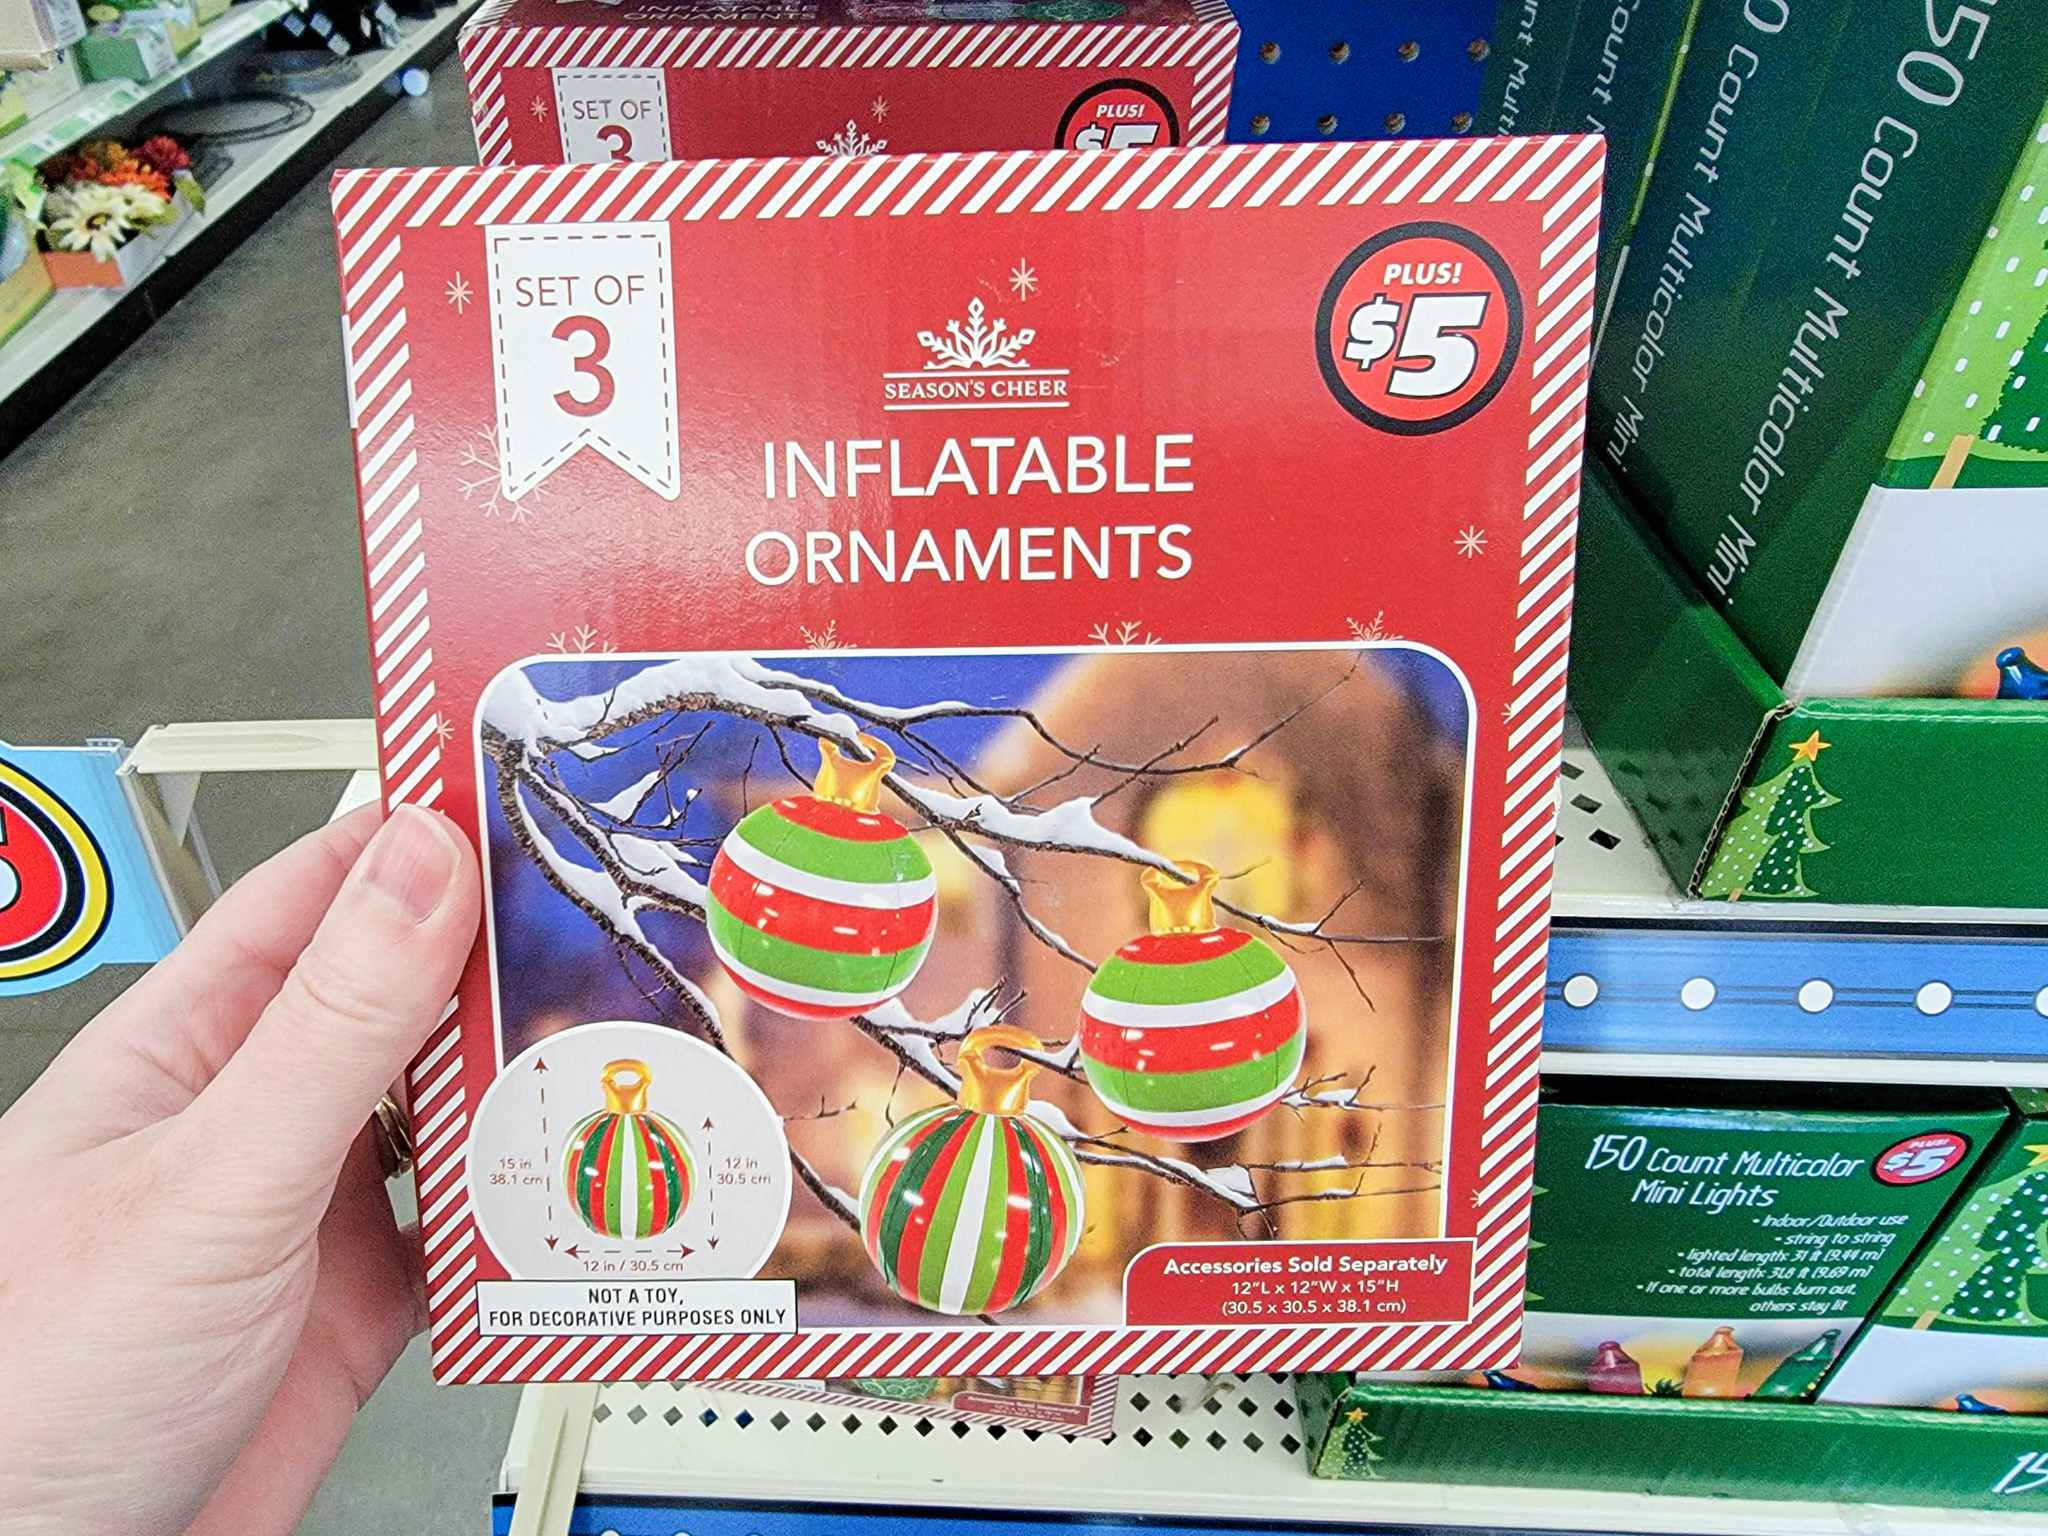 Hand holding a box of Dollar Tree Plus inflatable ornaments.